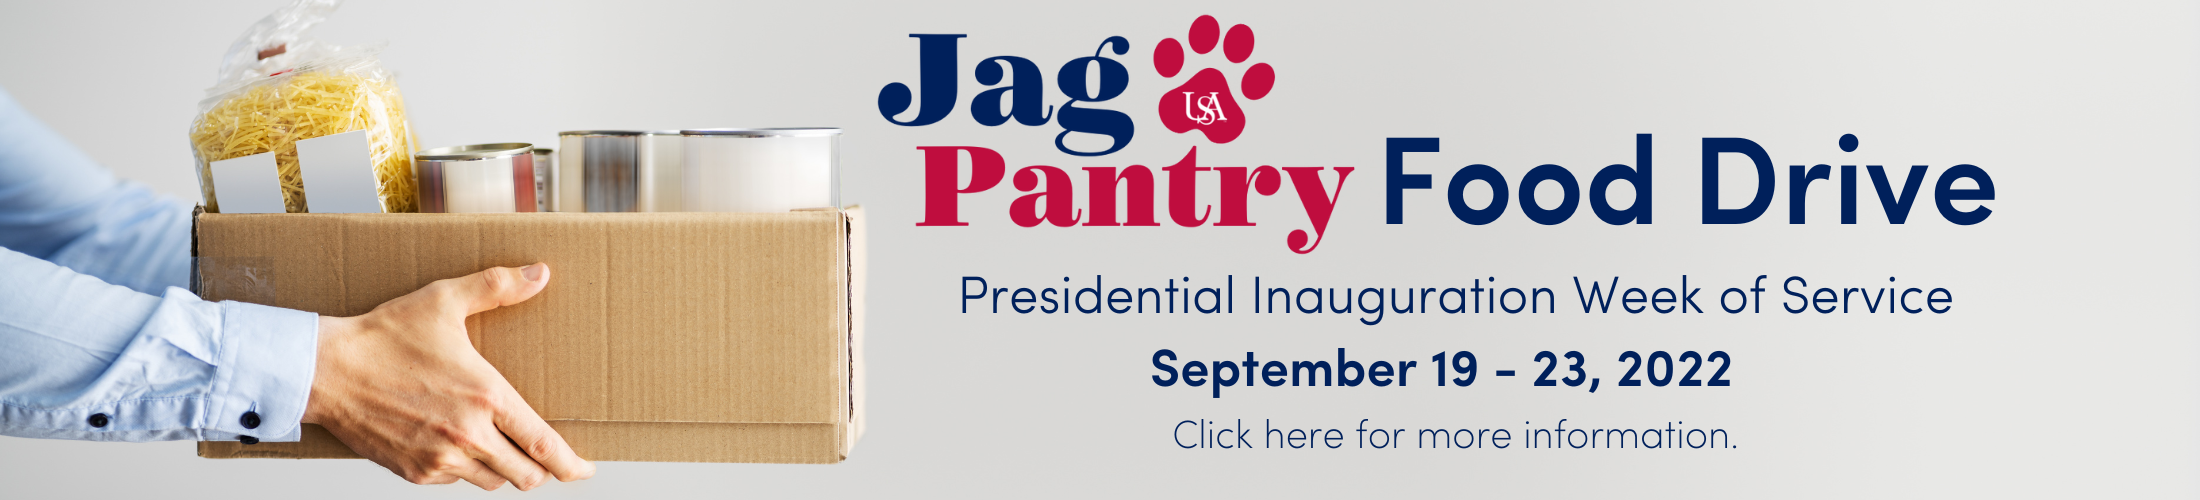 Jag Pantry Food Drive Presidential Inauguration Week of Service Sept 19023, 2022 Click here for more information.